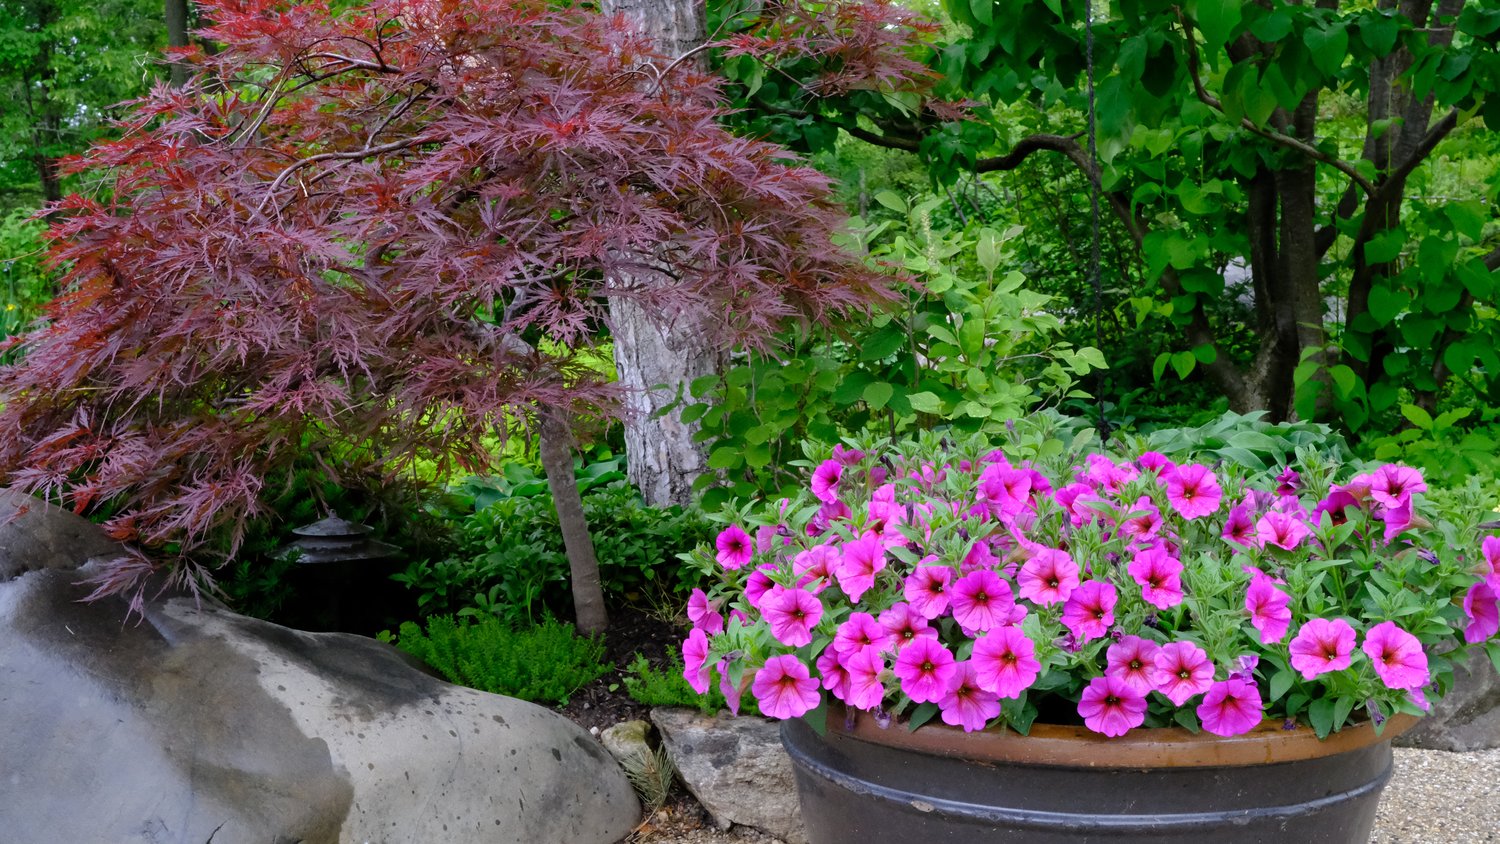 Japanese maple tree and pot of pink flowers.